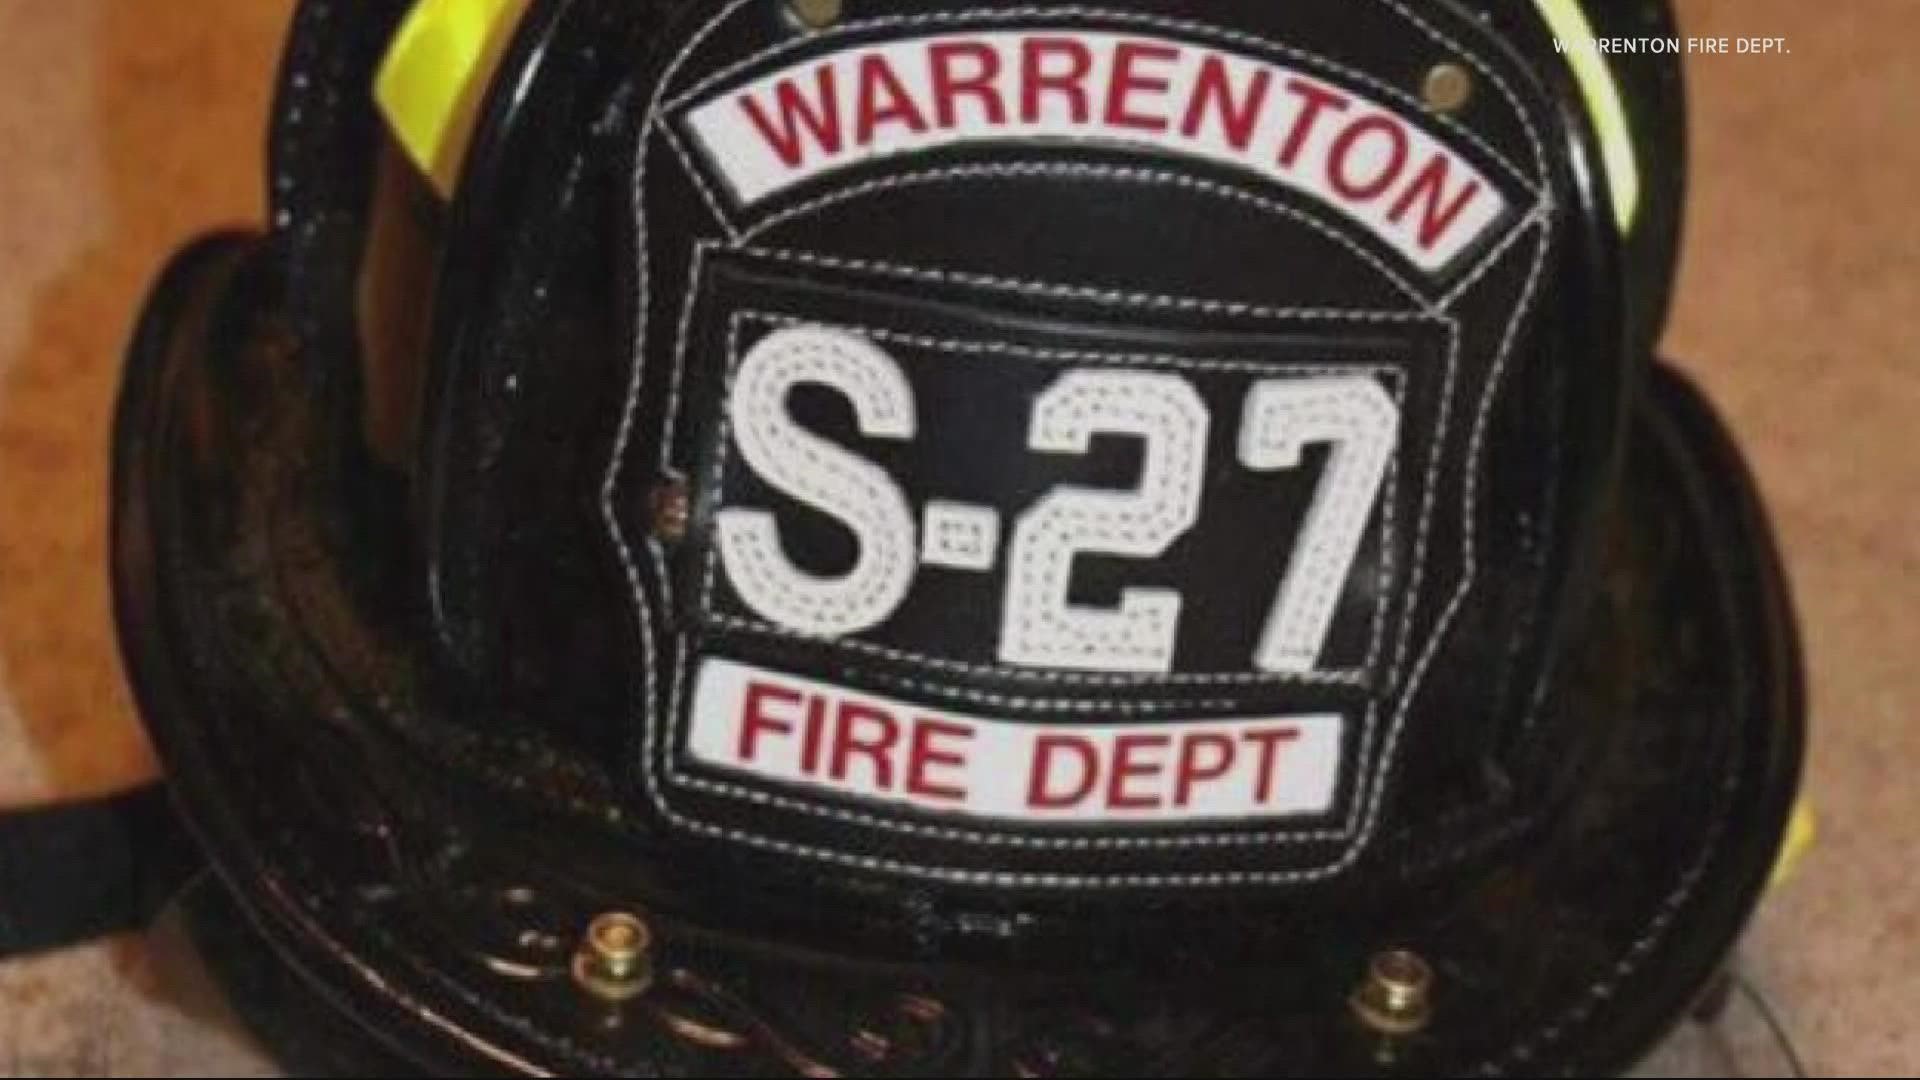 After presenting concern to the governor about volunteers fleeing a COVID vaccine mandate, the city of Warrenton unexpectedly recruited new volunteer firefighters.